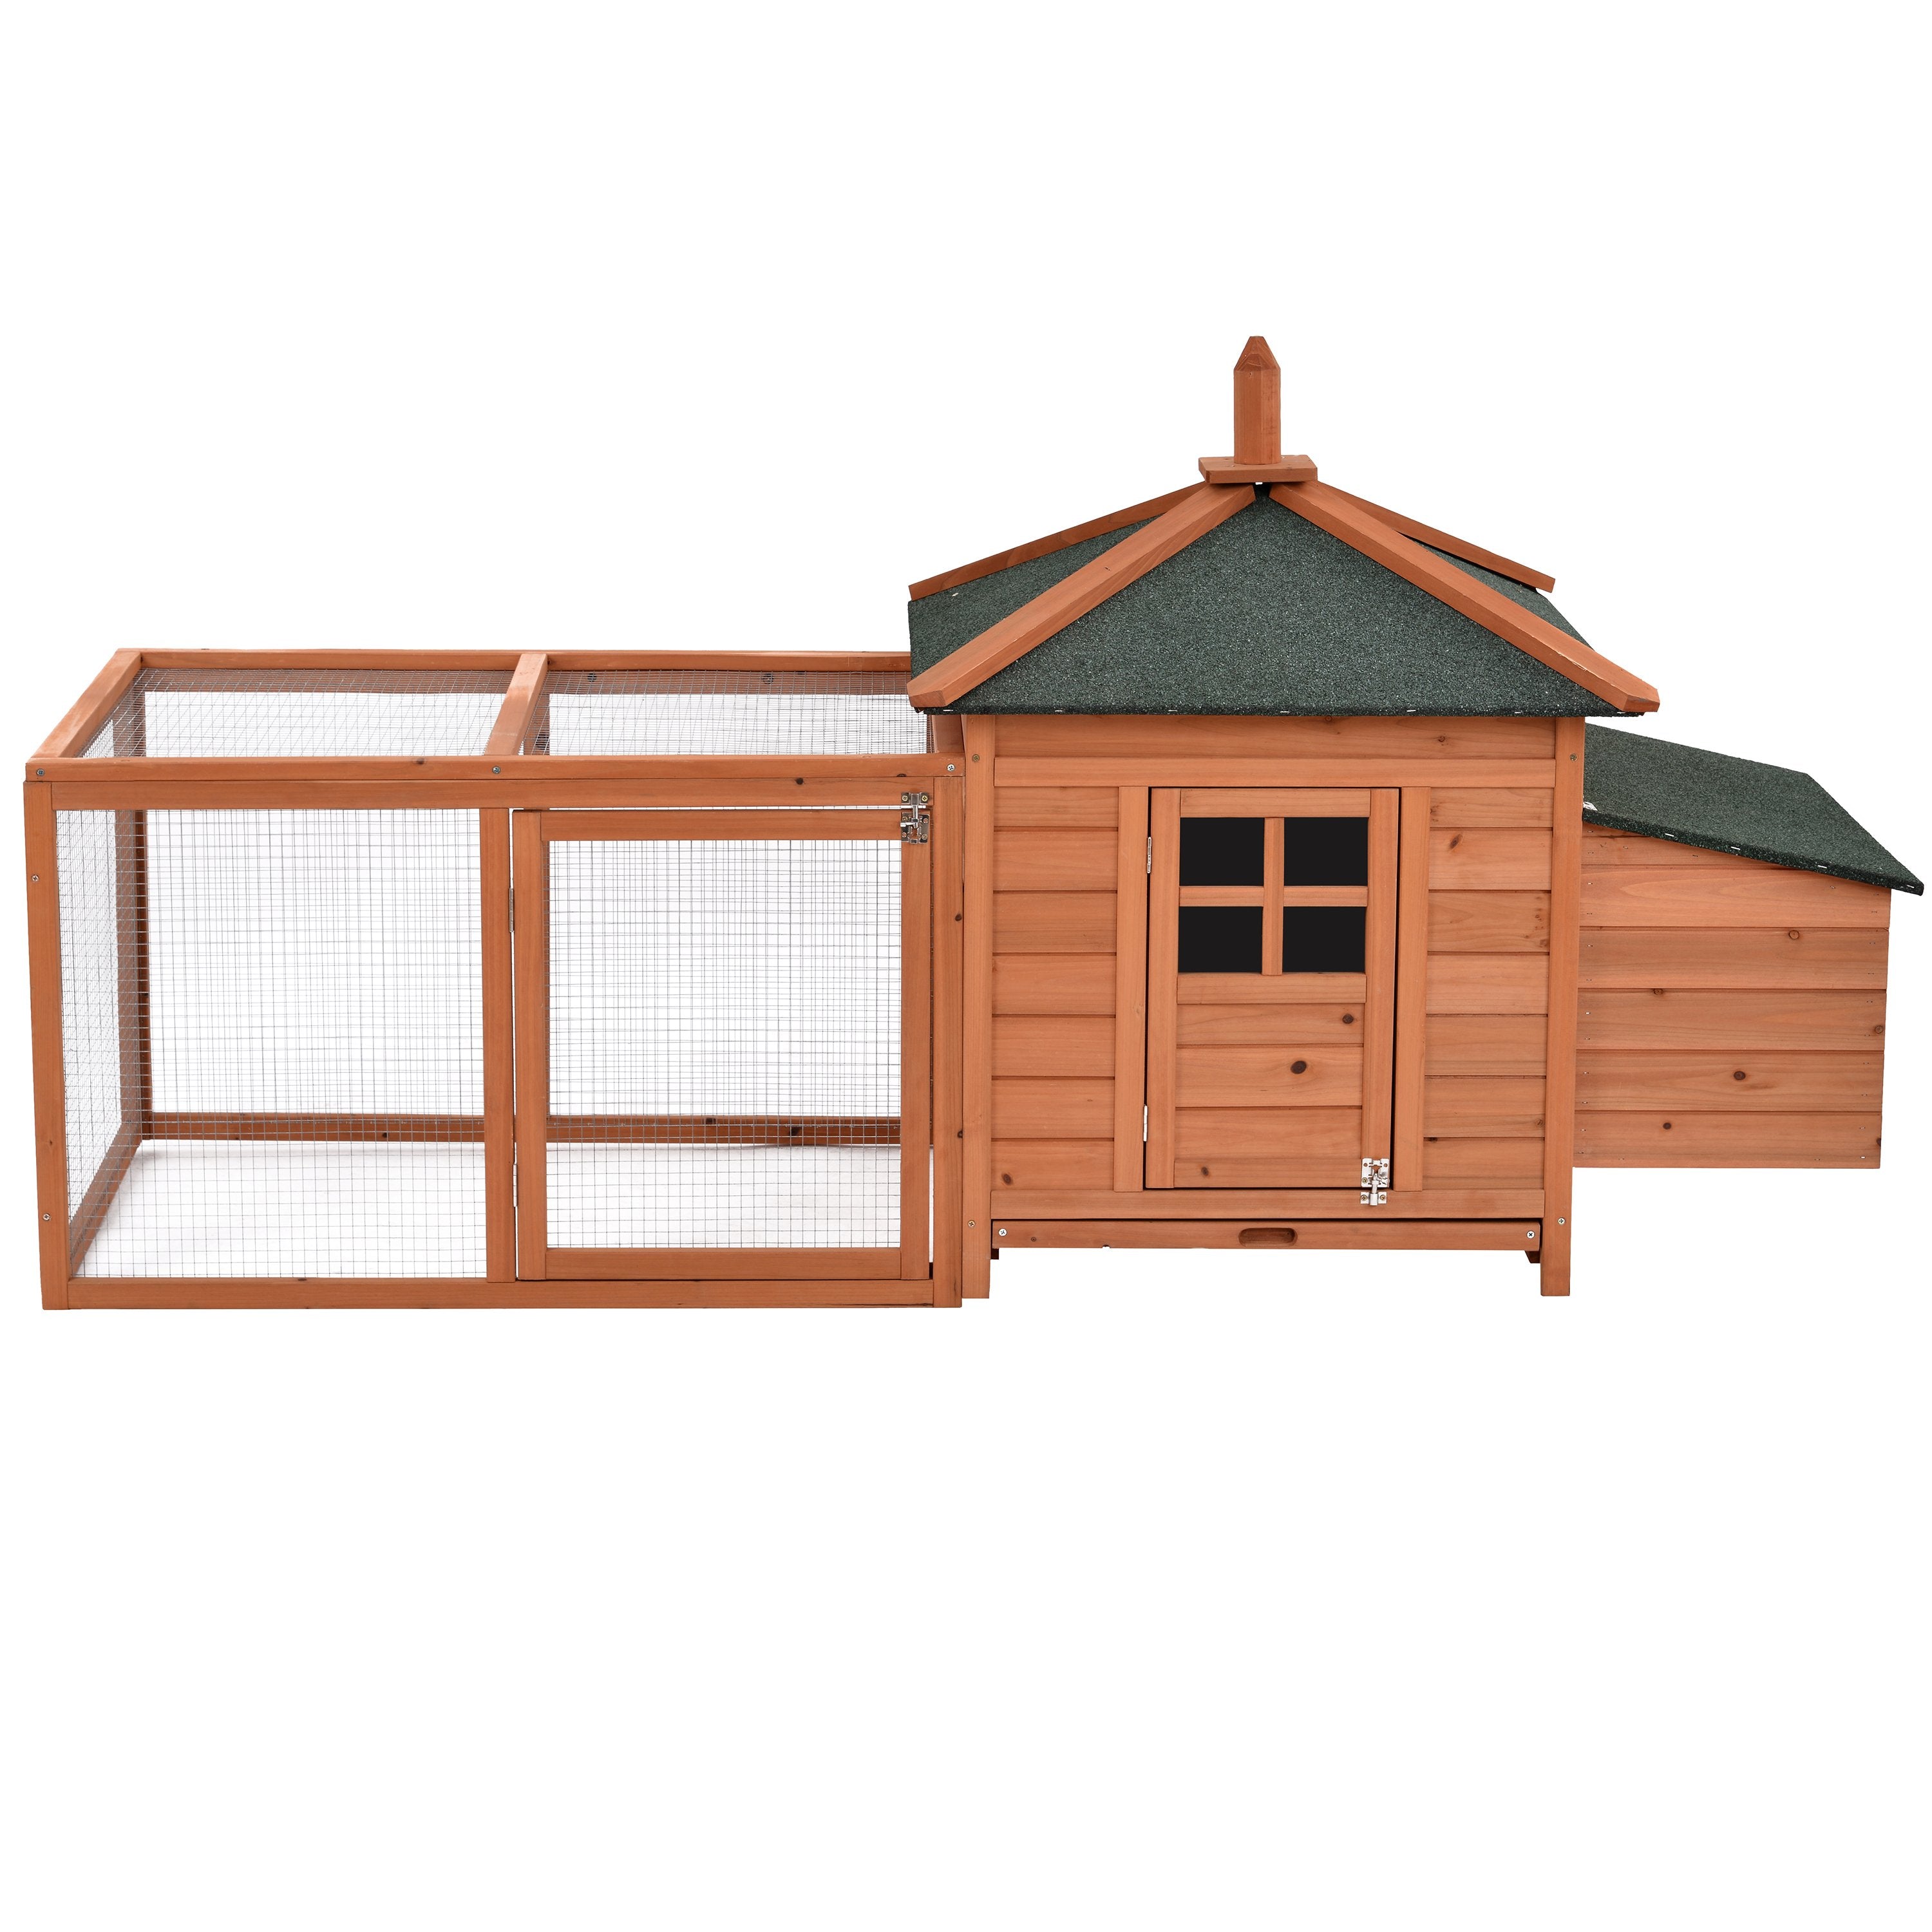 78" Large Outdoor Wooden Chicken Coop Poultry Cage Rabbit Hutch Small Animal House with Removable Tray and Ramp for 3 Chickens, Natural Color-Boyel Living